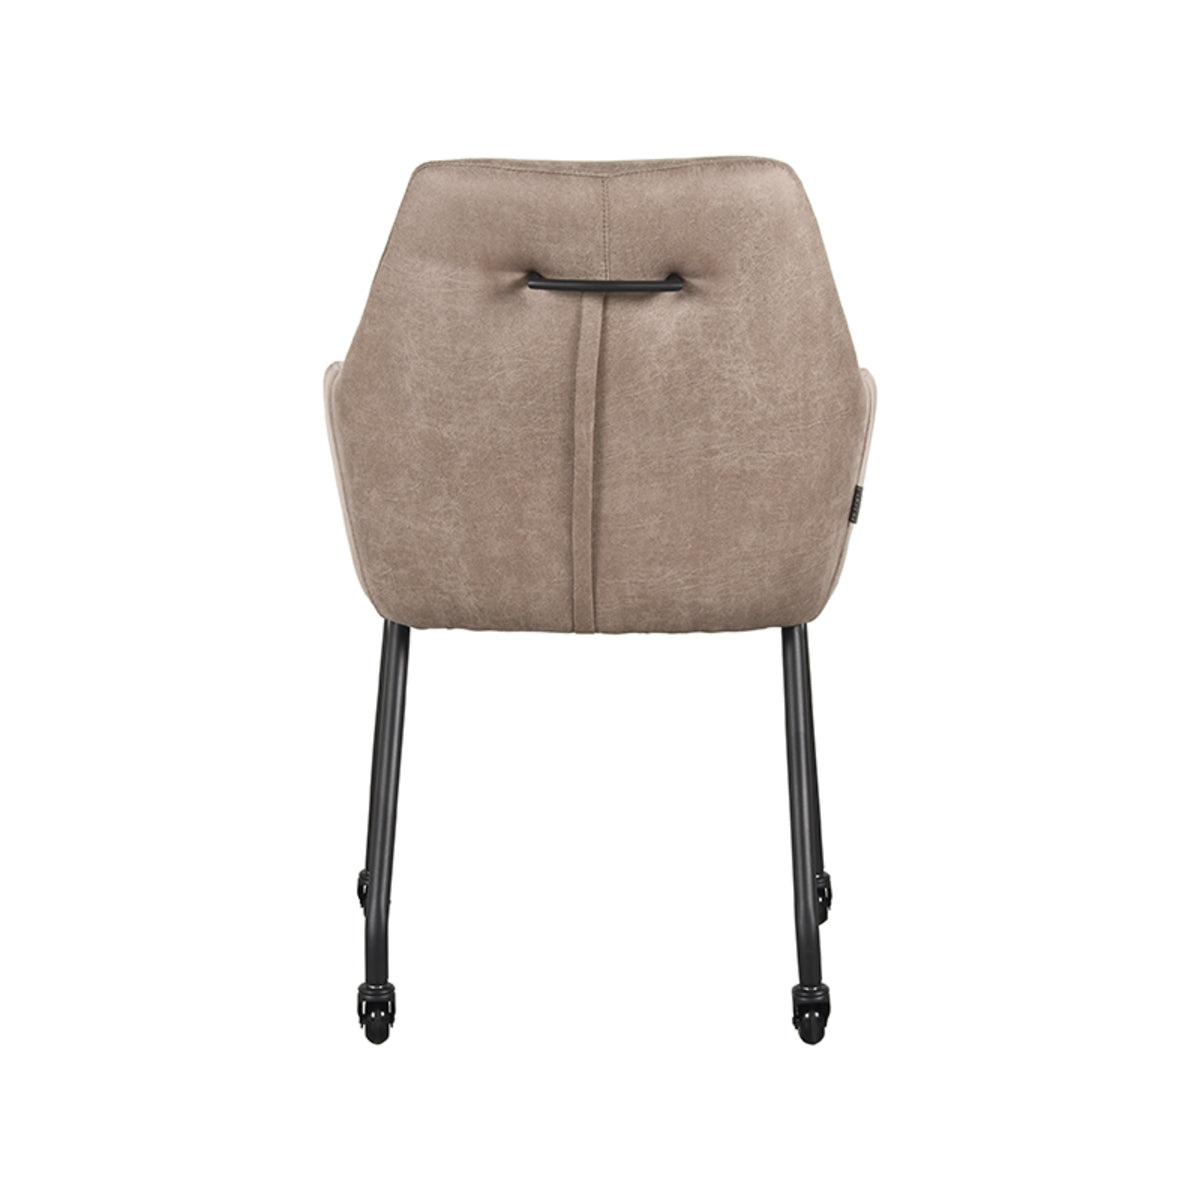 LABEL51 Dining room chair Lenny - Taupe - Microfiber | 2 pieces